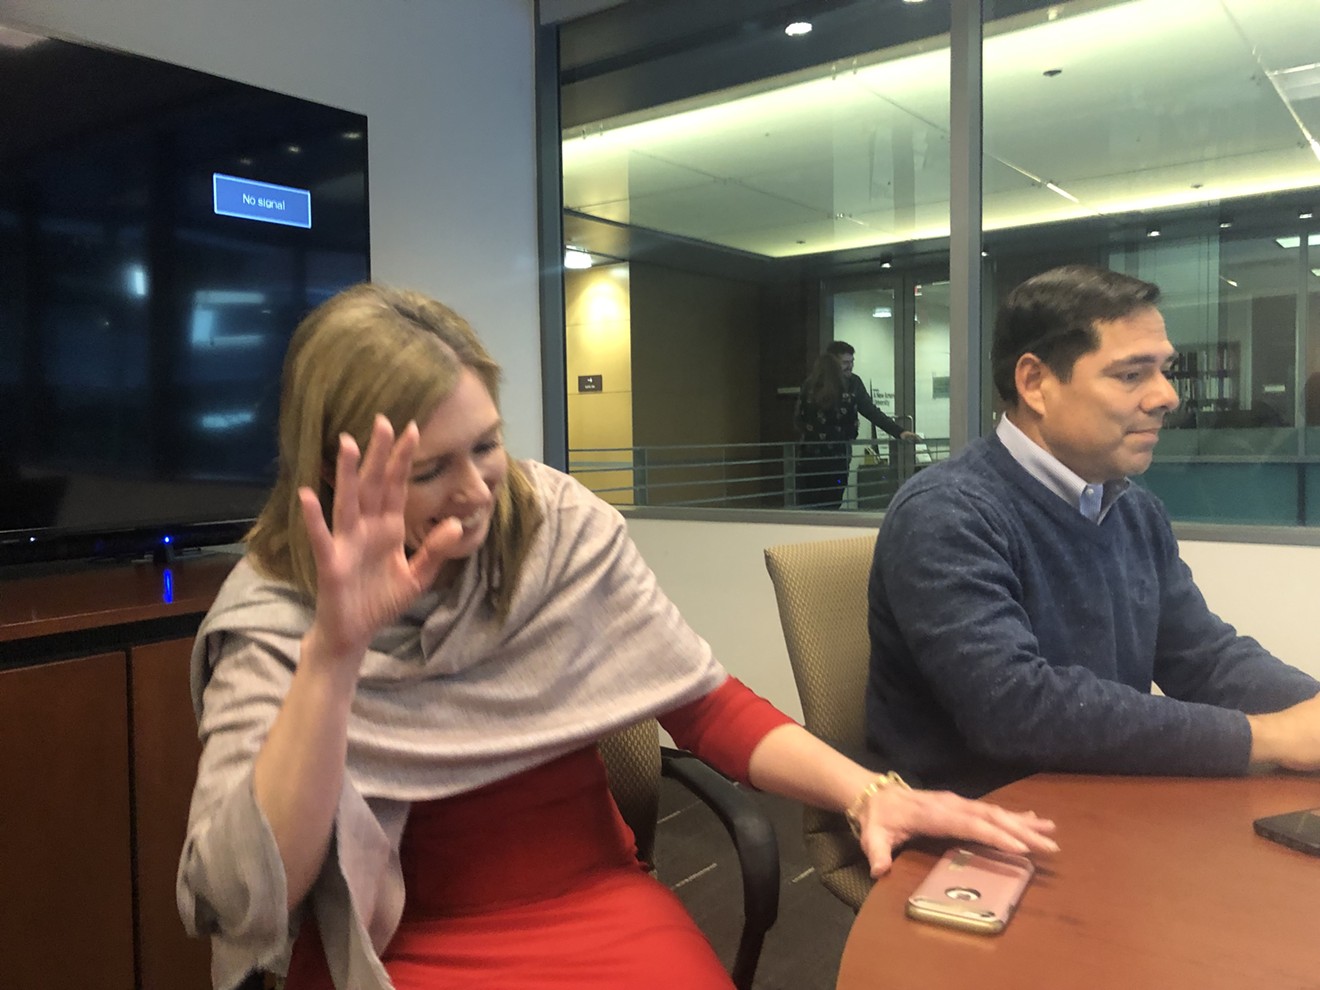 Katie Paquet, vice-president of ASU's Media Relations Office and Strategic Communications, reflected her office's attitude about the media by declining to have her photo taken after a meeting about the university's non-transparent public records policies. Jerry Gonzalez, media relations officer, is at right.